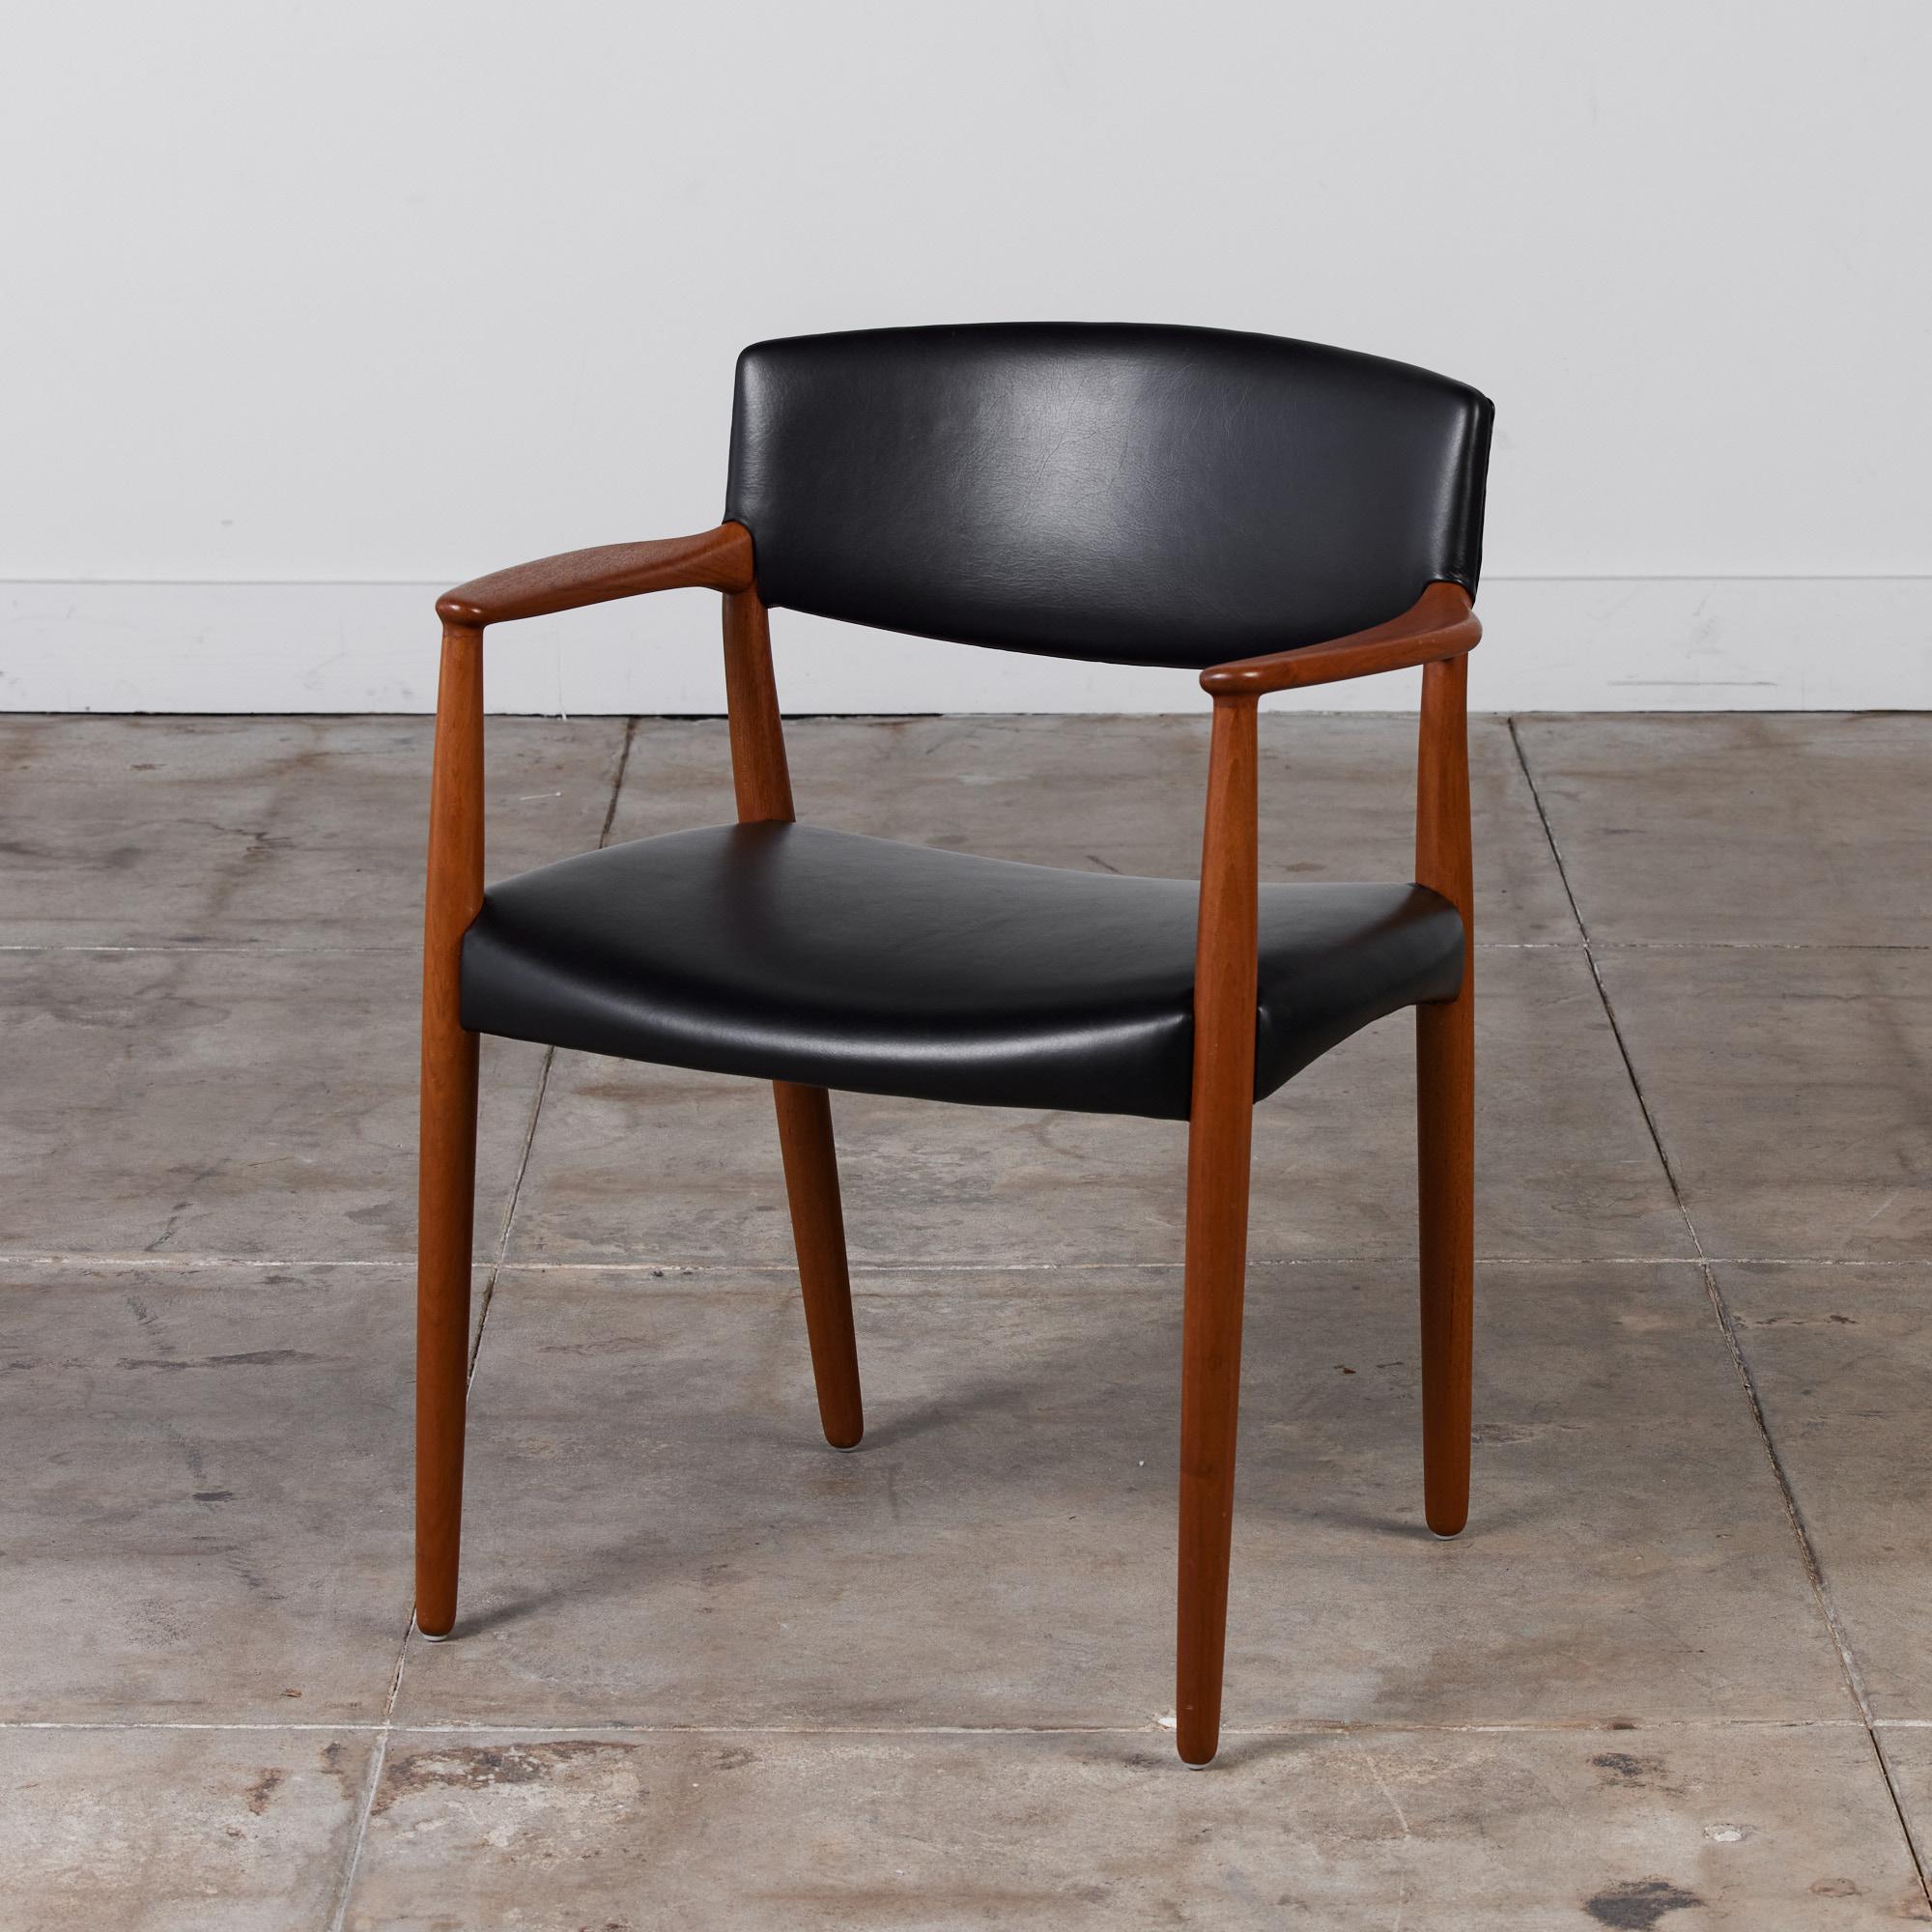 Rare armchair by Ejner Larsen & Aksel Bender Madsen for Willy Beck, c.1950s, Denmark. The chair features a solid teak frame and black leather upholstered wide seat and backrest.

Dimensions: 25